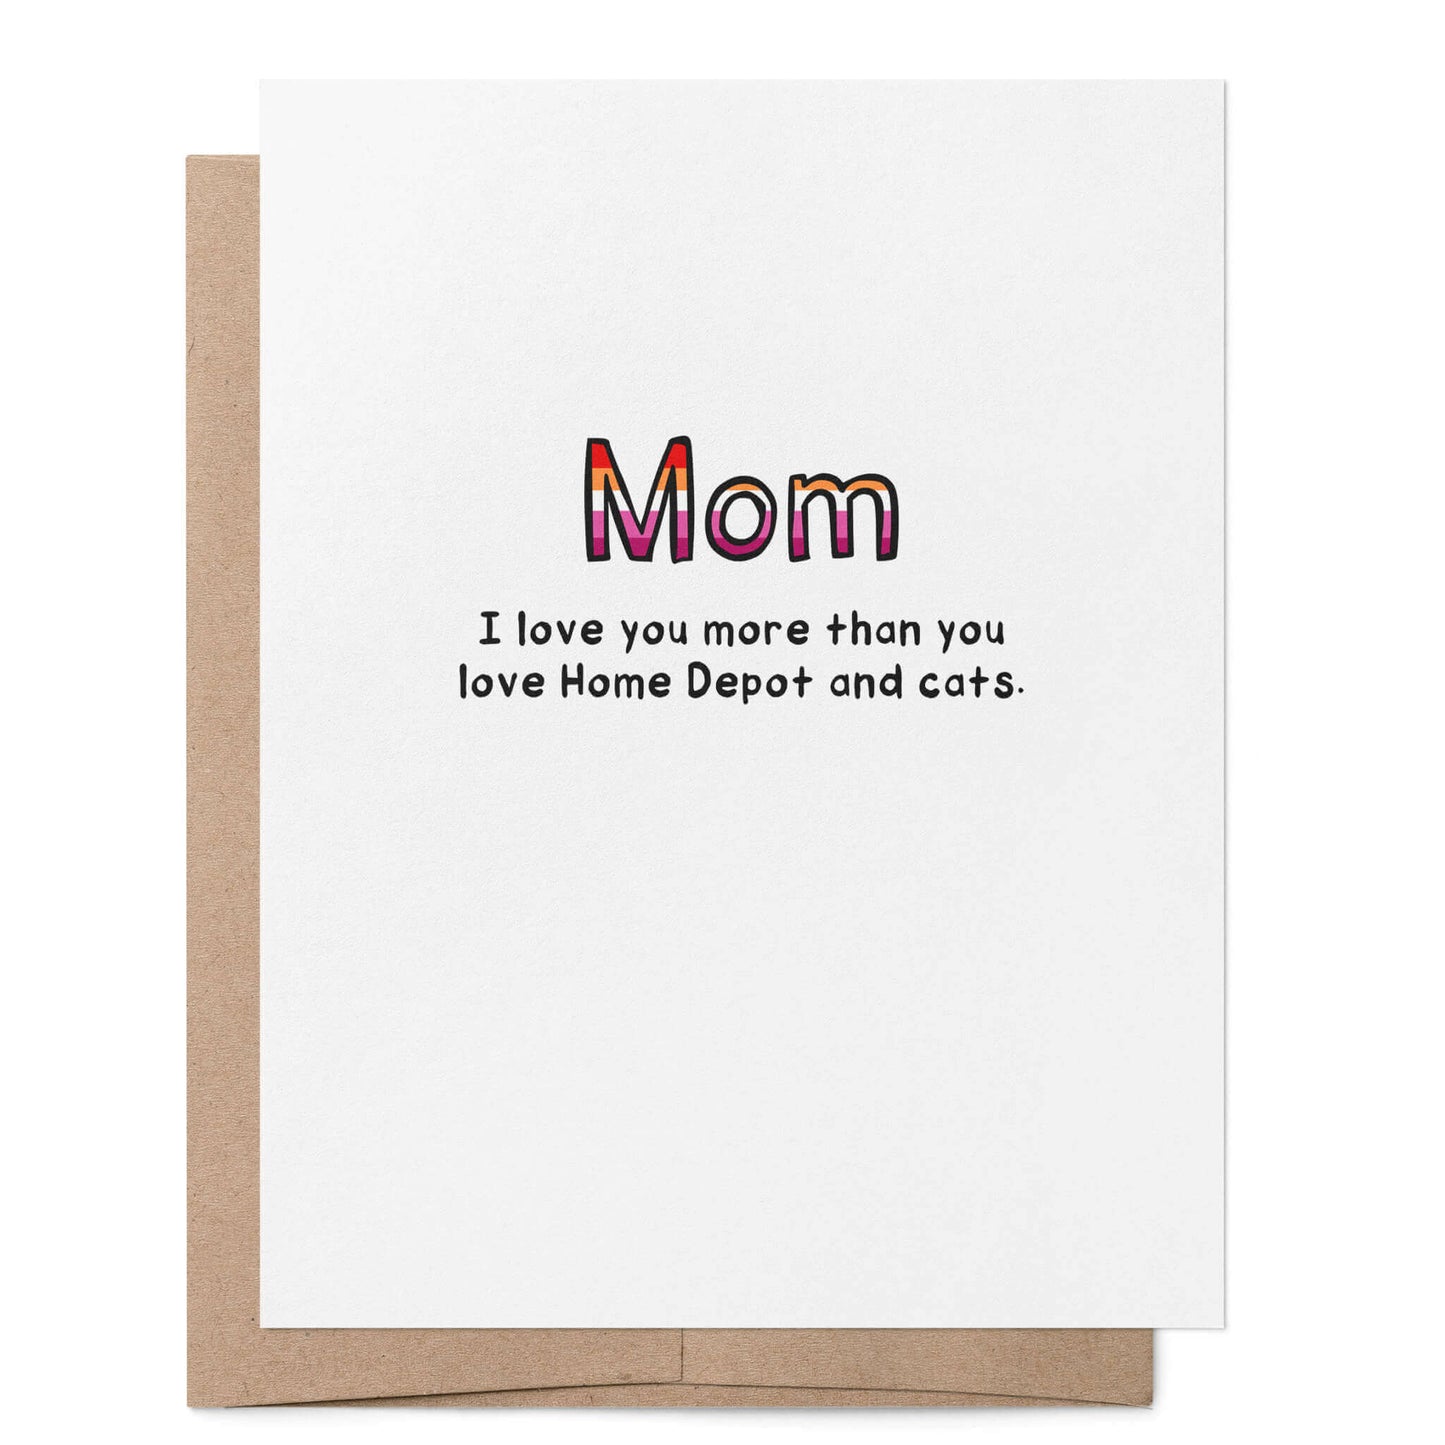 Lesbian Mom Love You More than Home Depot and Cats Card